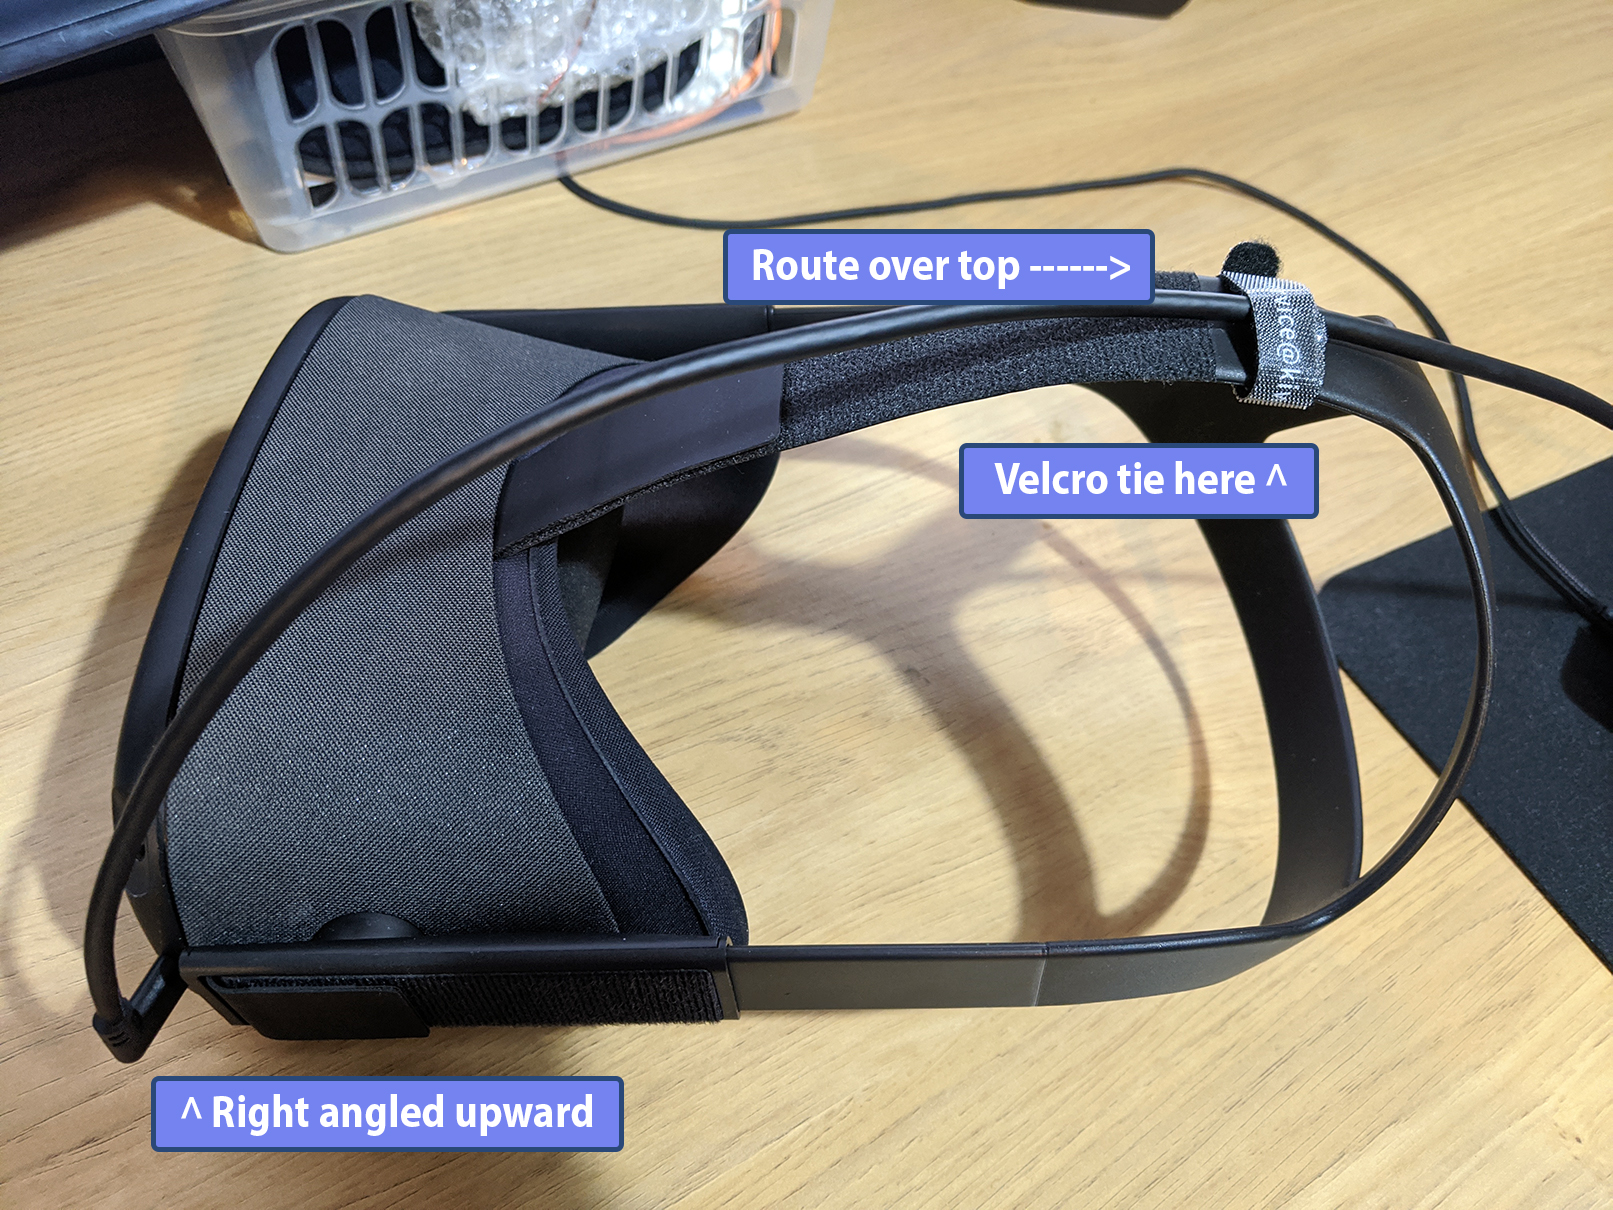 KIWI Design 10ft (3m) Oculus Quest Link cable Review (Hardware) - Official  GBAtemp Review | GBAtemp.net - The Independent Video Game Community